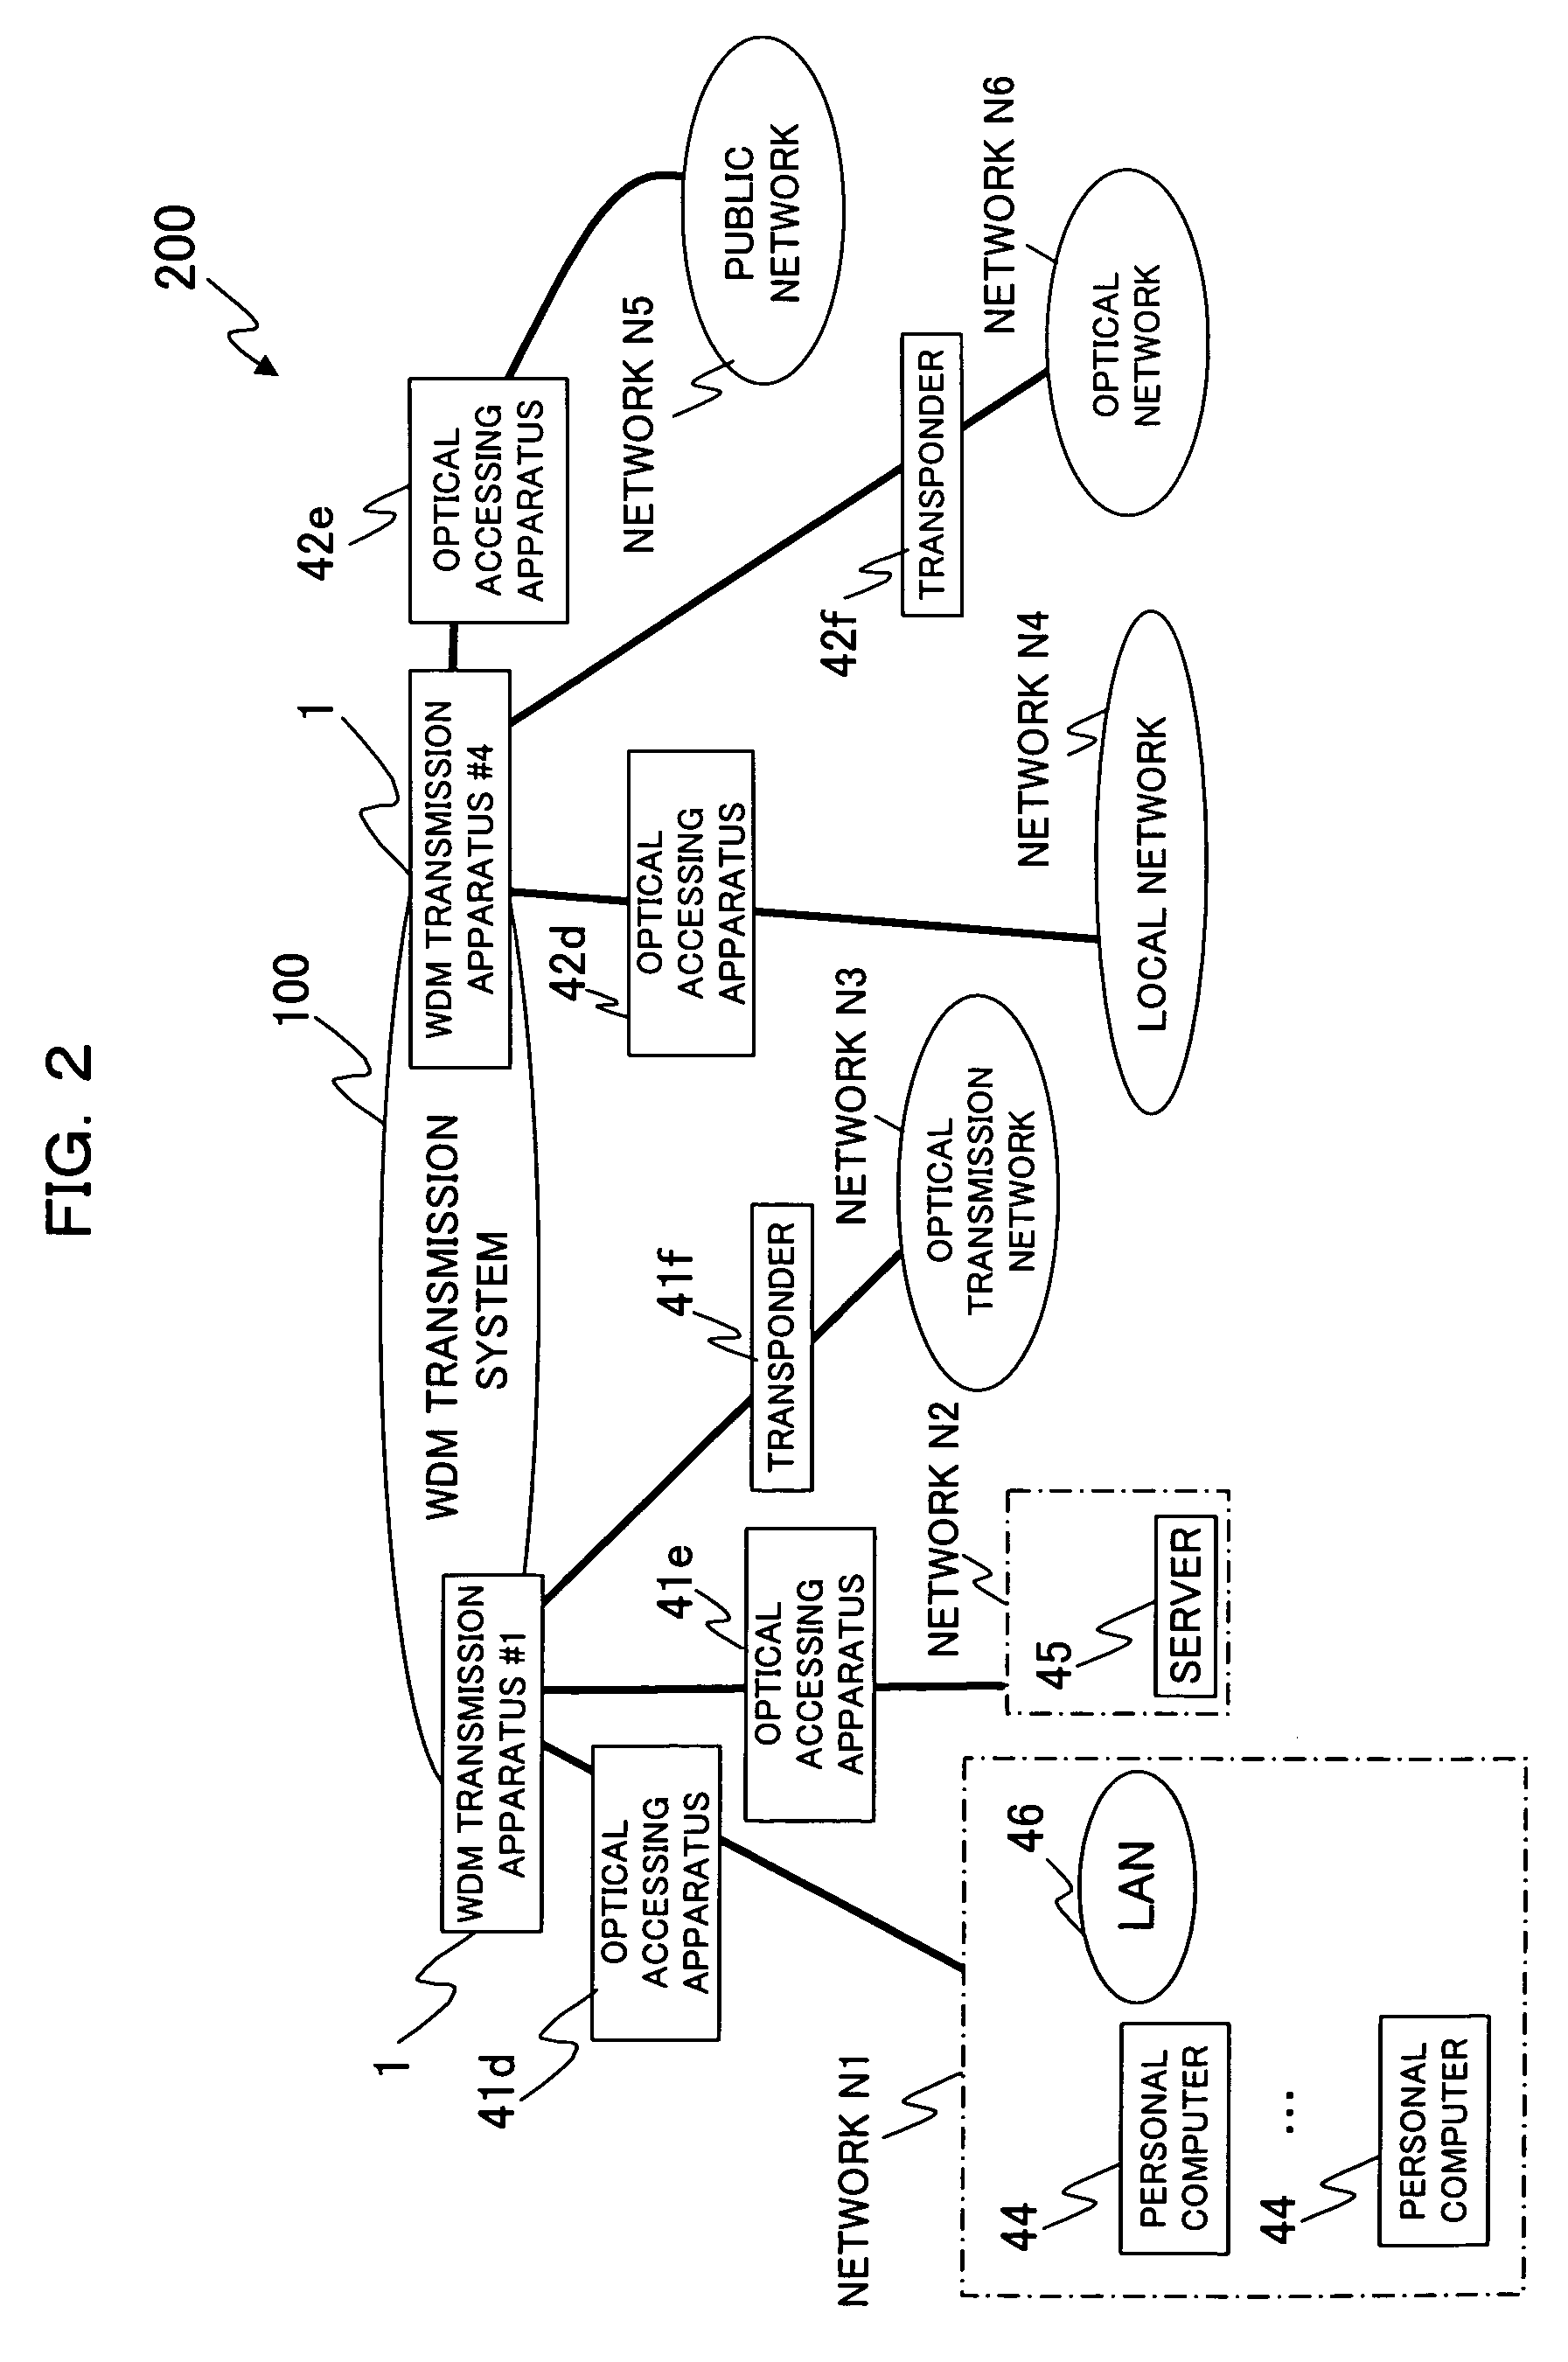 Optical transmission system, optical transmission and reception apparatus, optical transmission apparatus, optical wavelength channel connection recognition control method and wavelength allocation apparatus